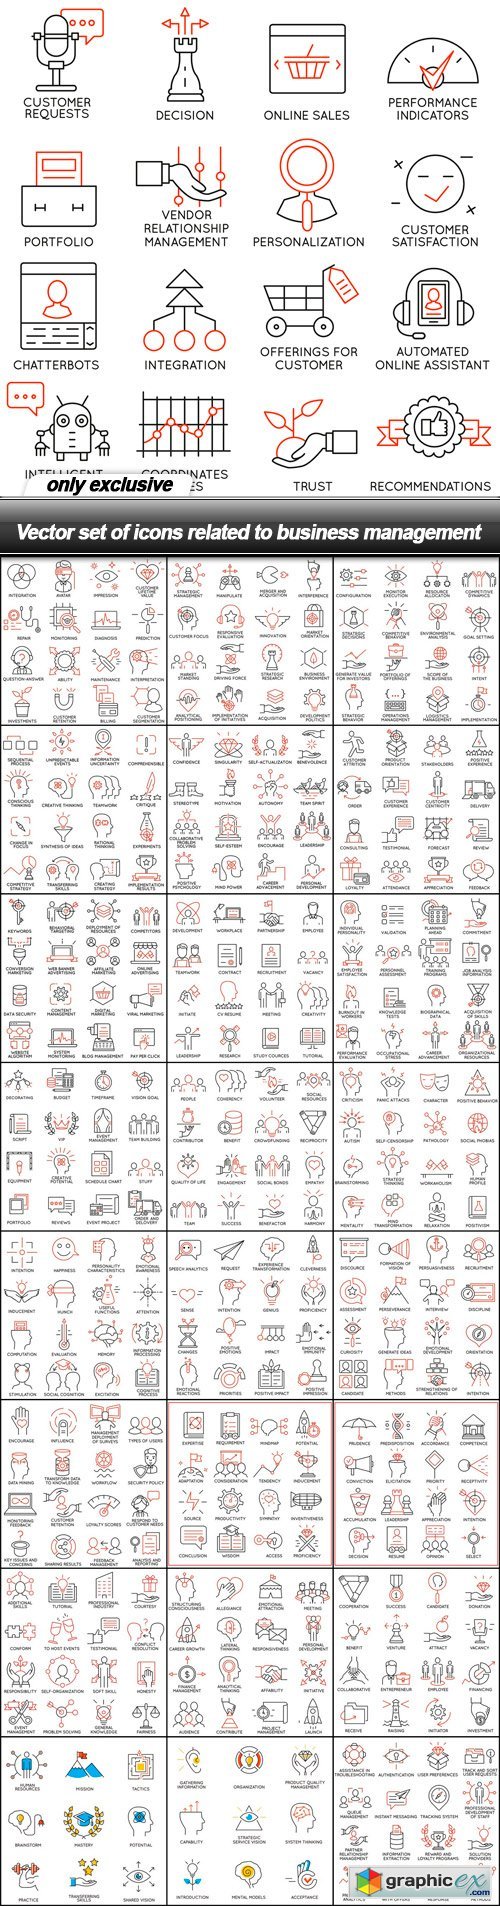 Set of icons related to business management - 25 EPS